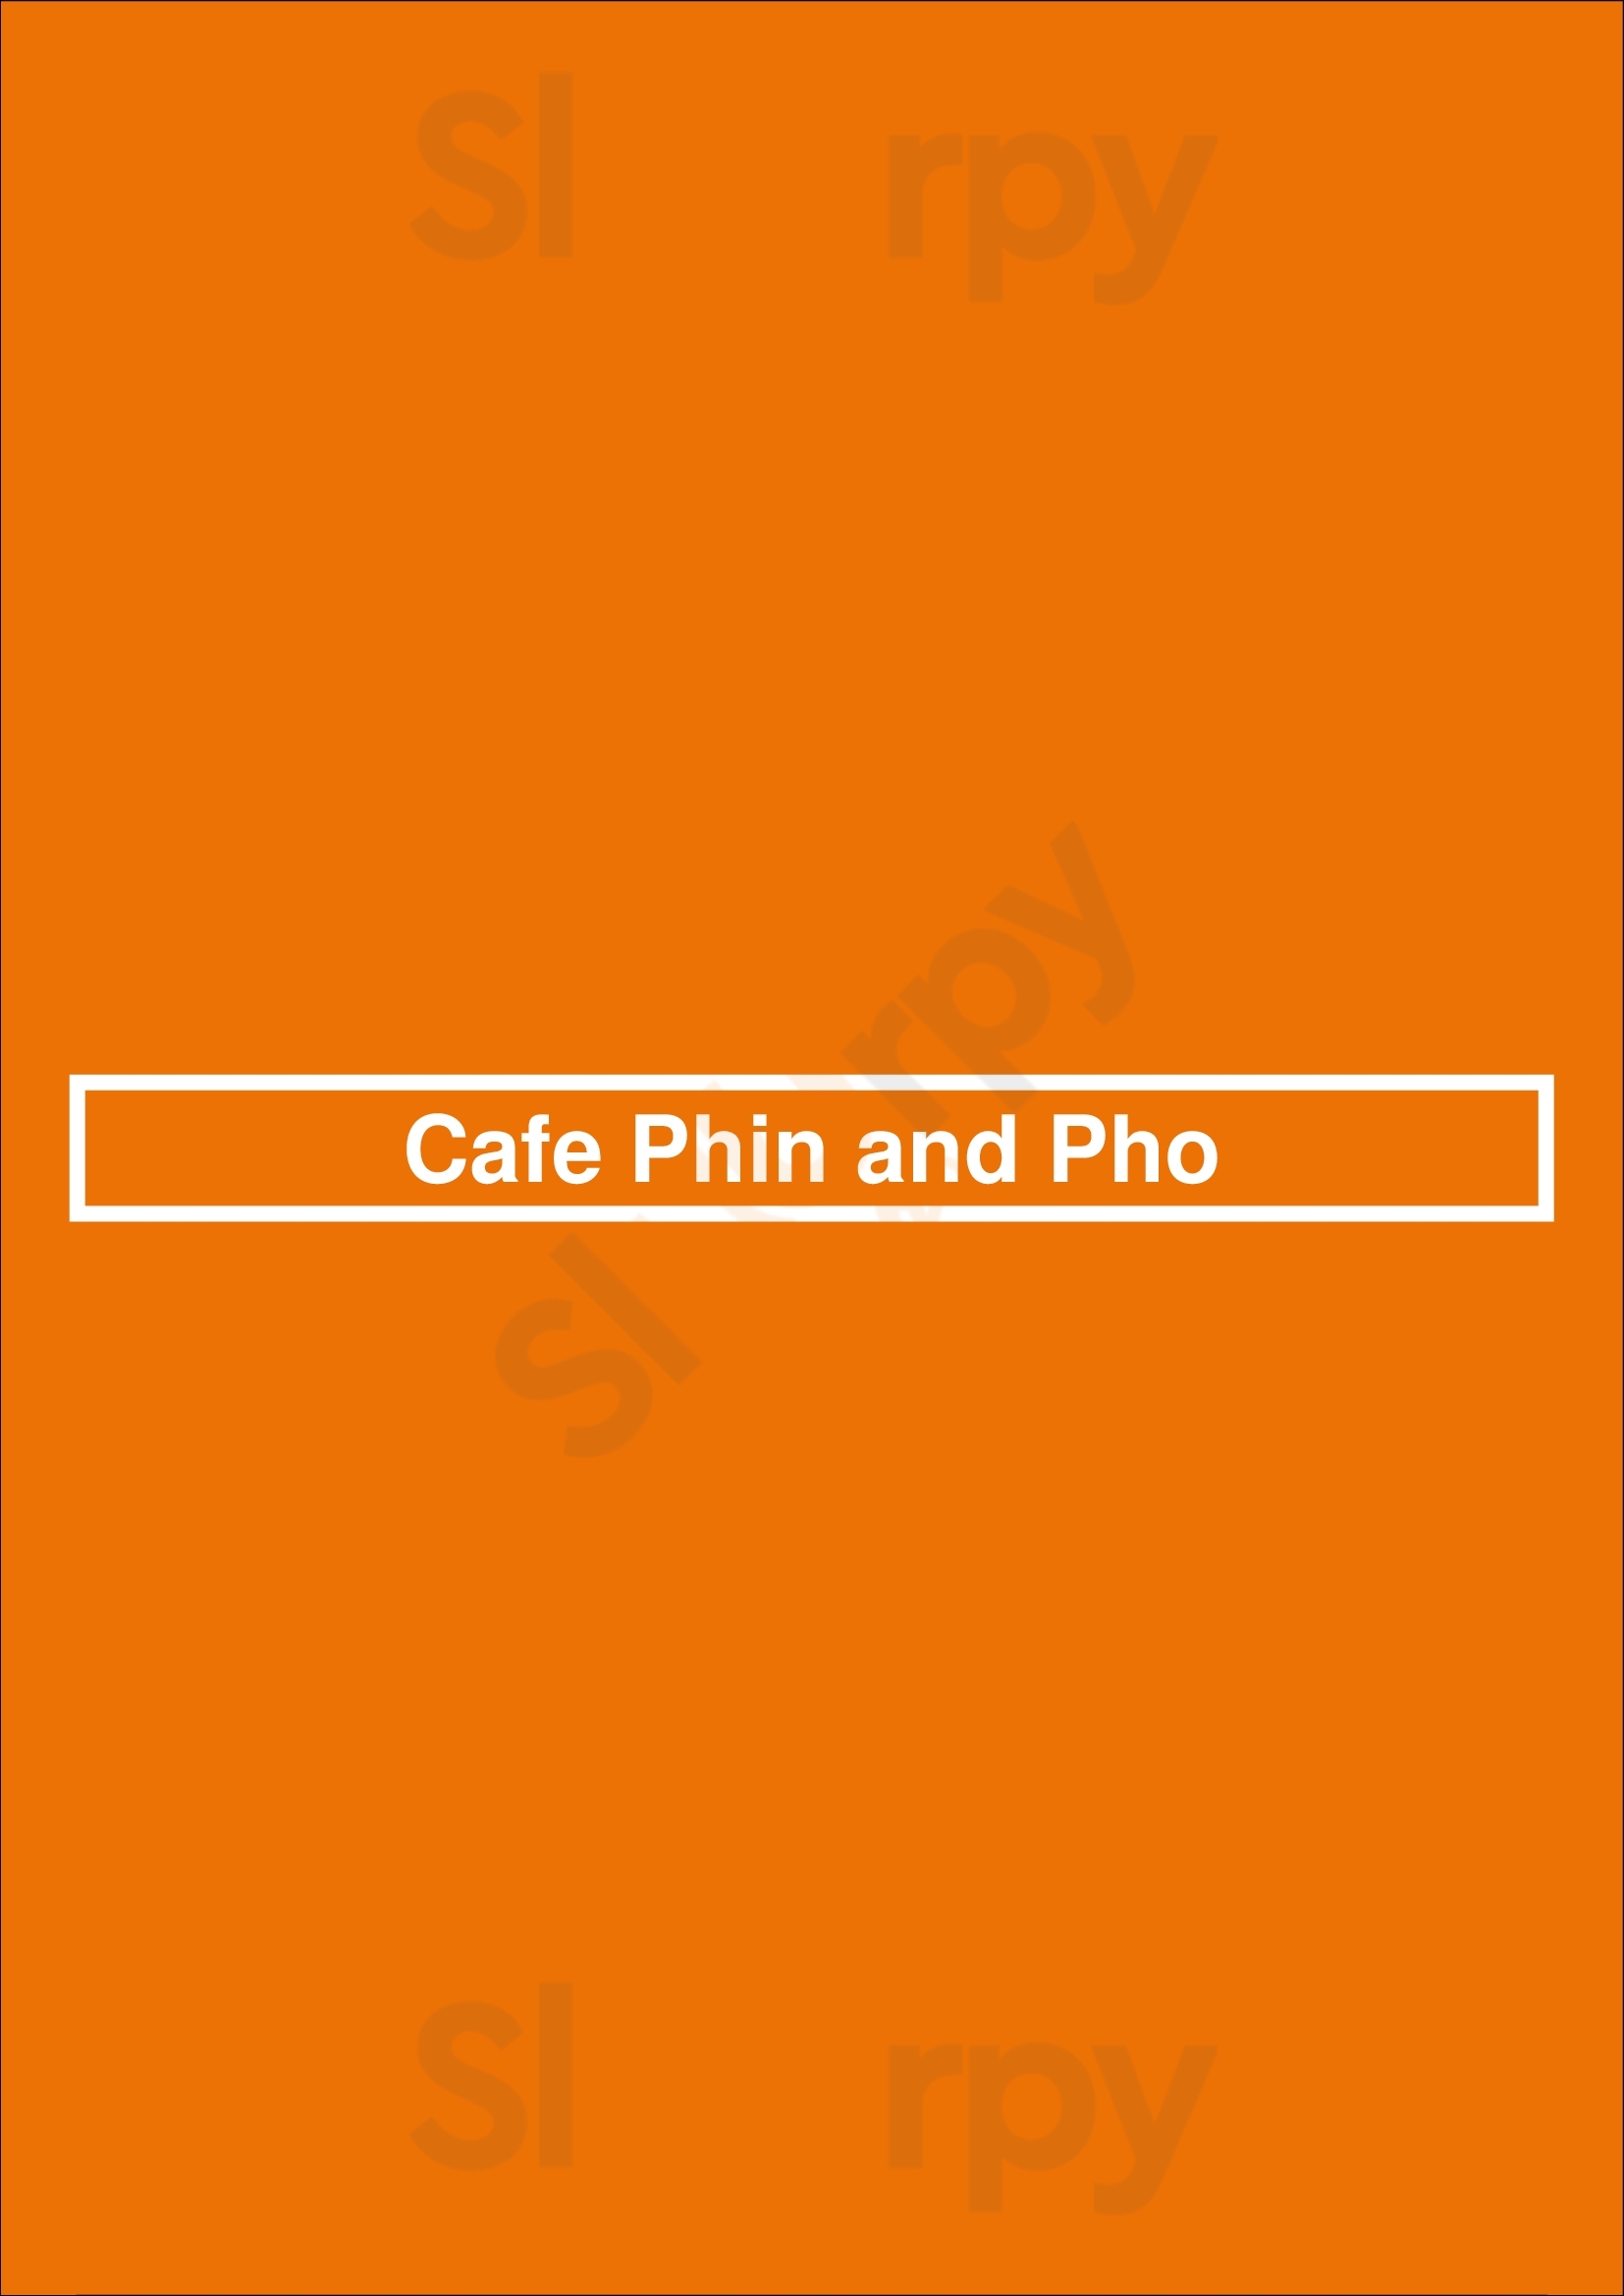 Cafe Phin And Pho Vancouver Menu - 1